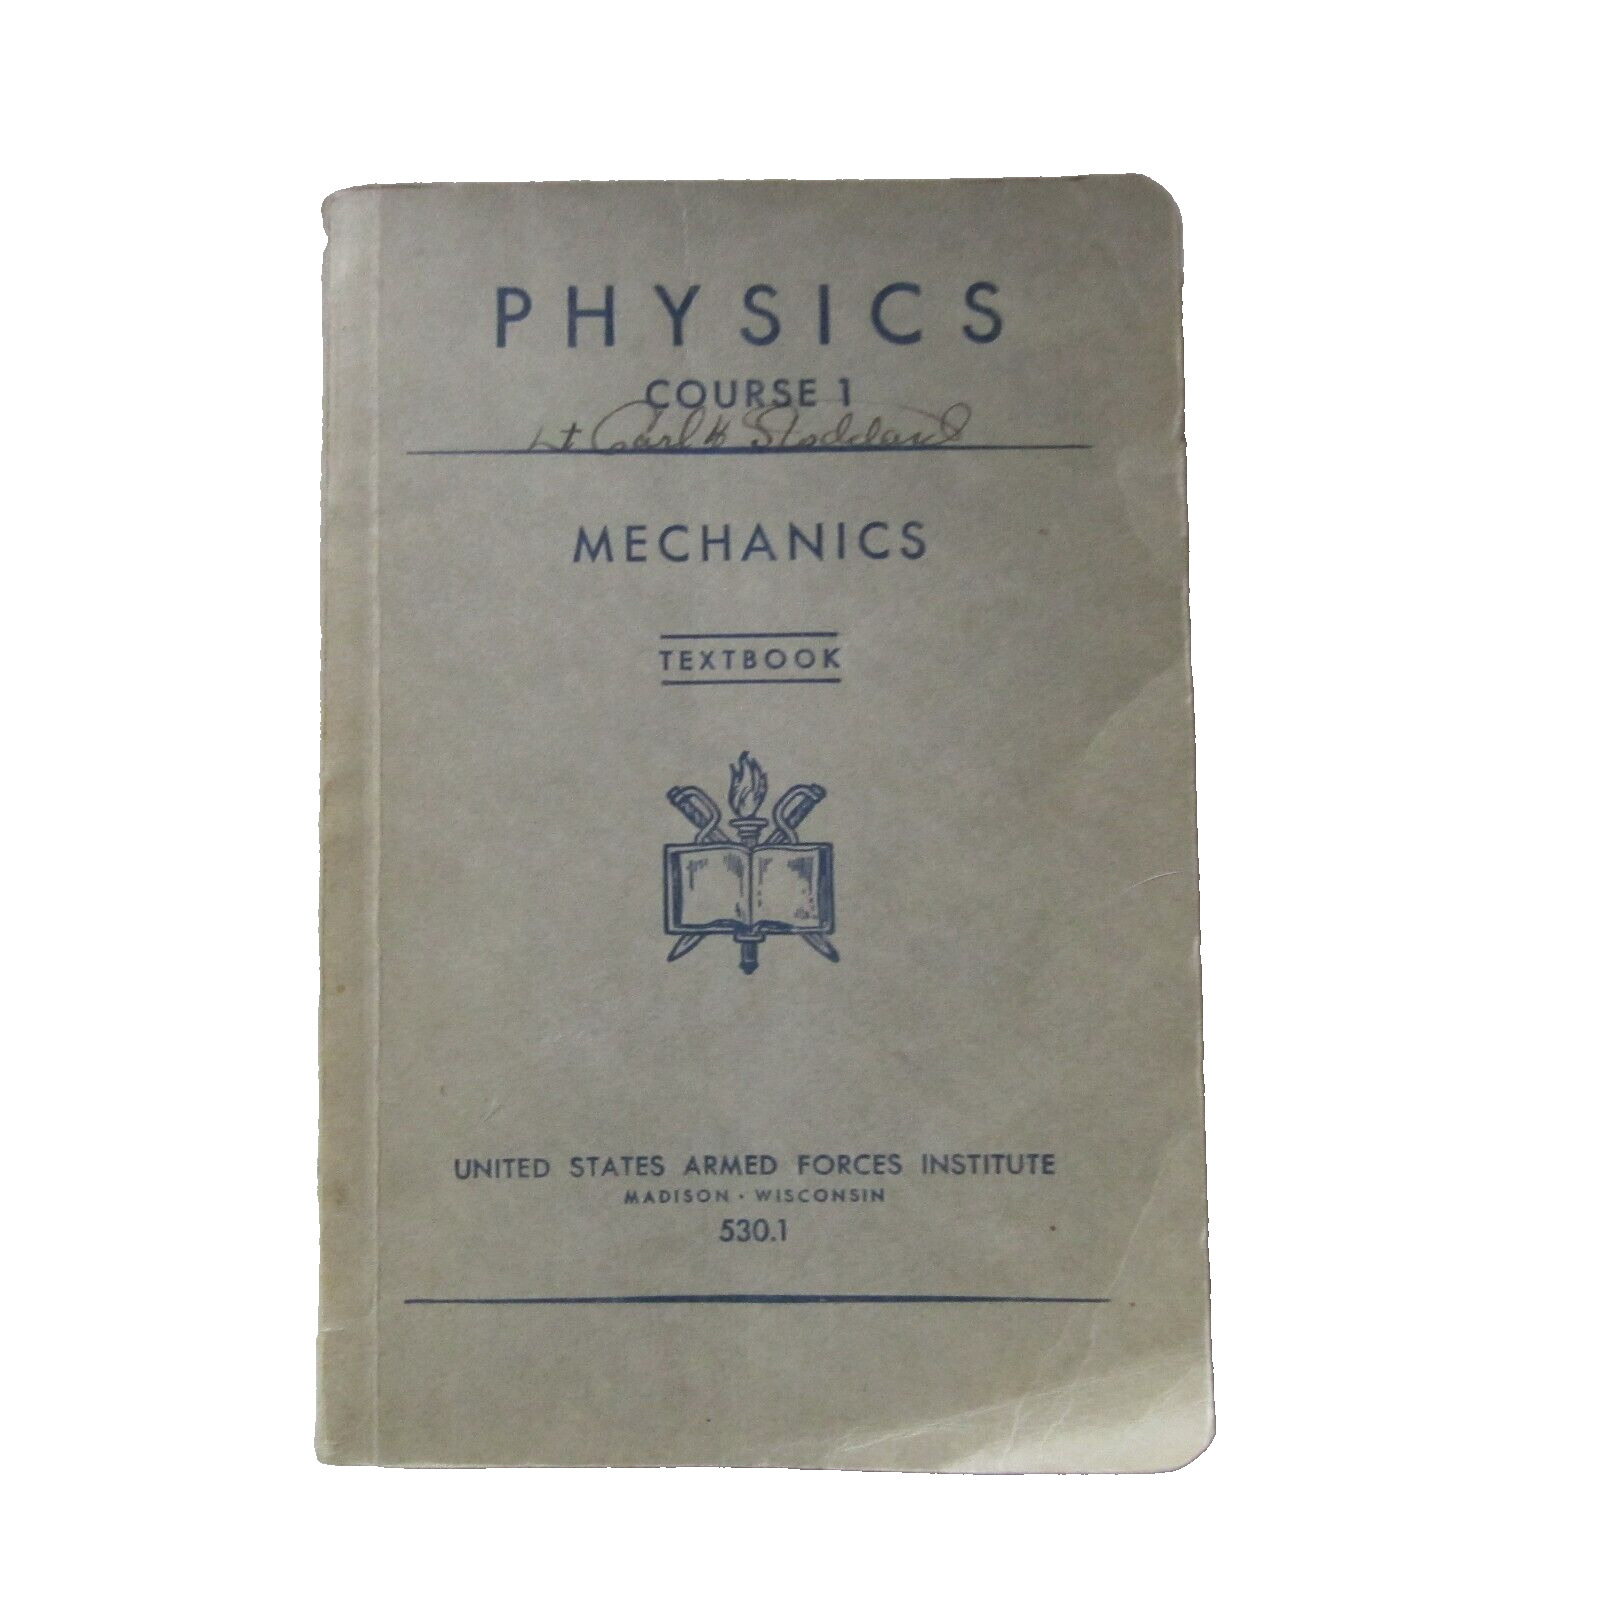 1943 WWII Physics Course 1 Textbook Mechanics US Armed Forces Institute 530.1